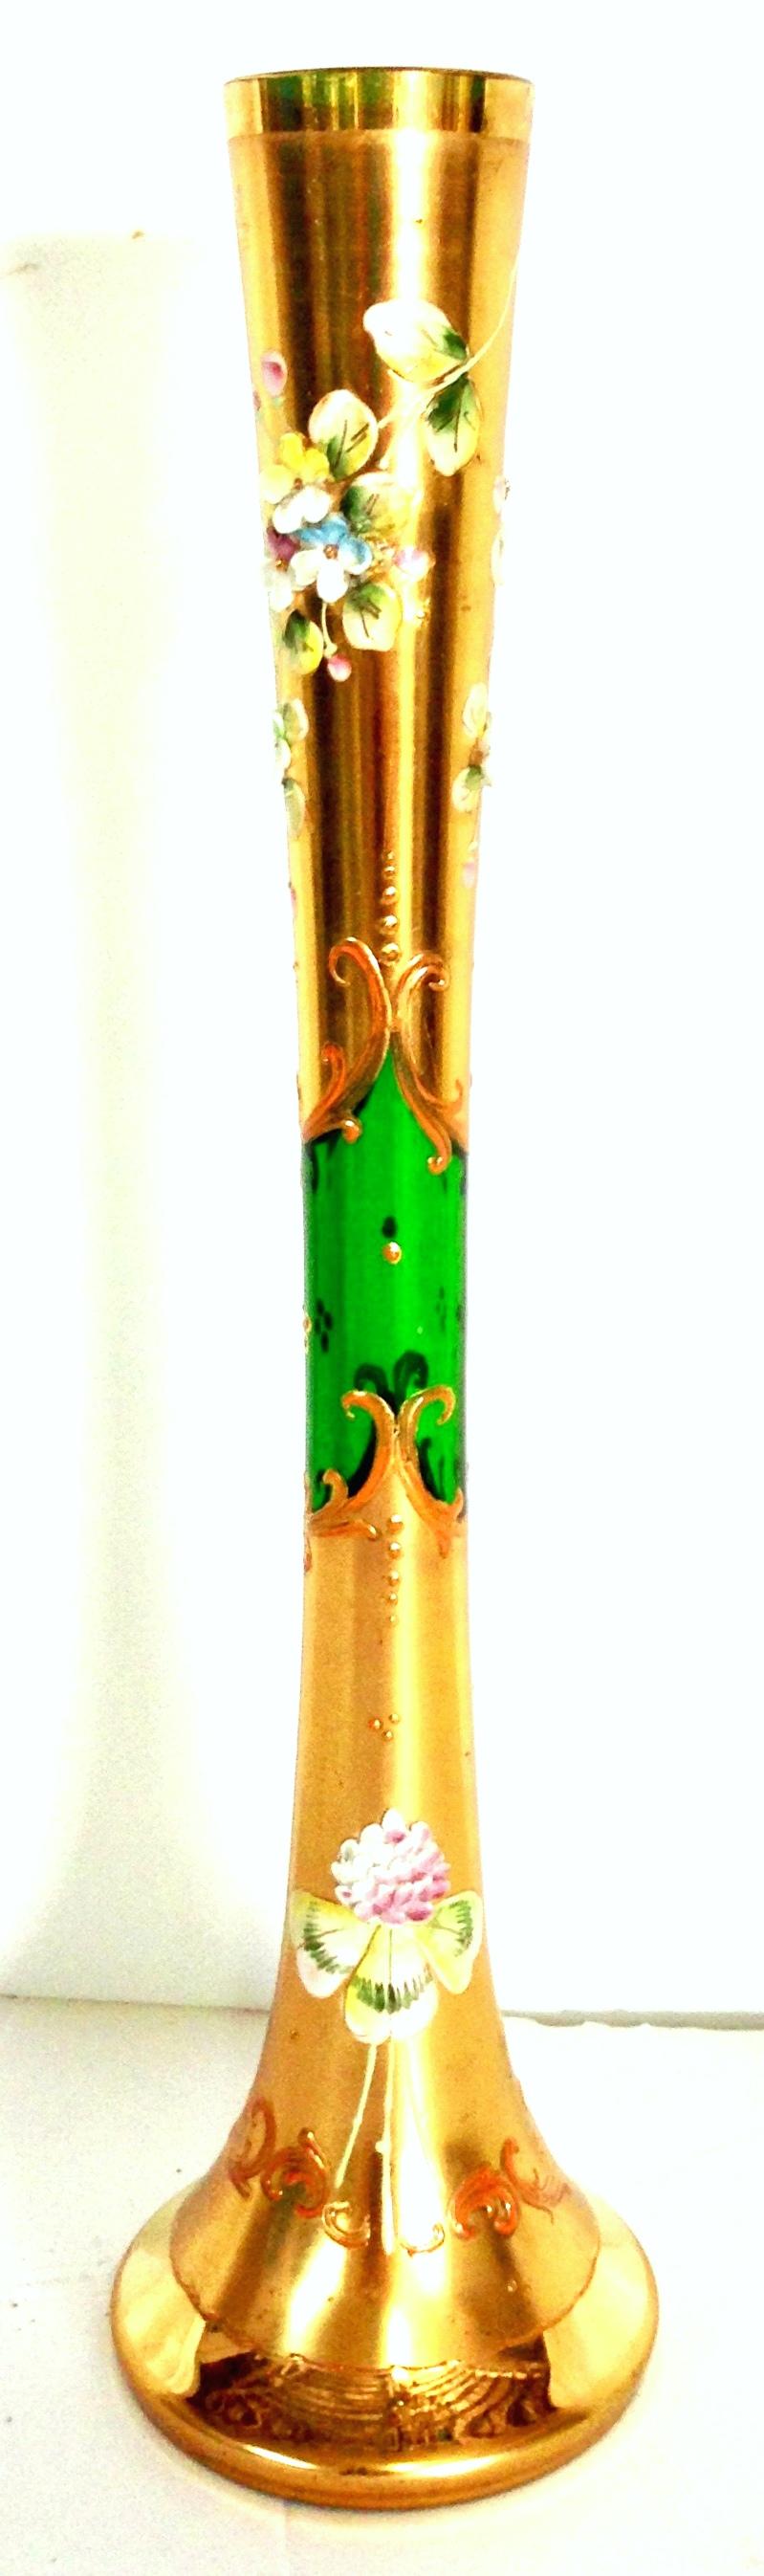 Mid-20th century Art Nouveau Bohemia art glass and 22-karat gold vase. Features a fluted shape with emerald green ground and heavily applied 22-karat gilt gold, hand painted floral motif.